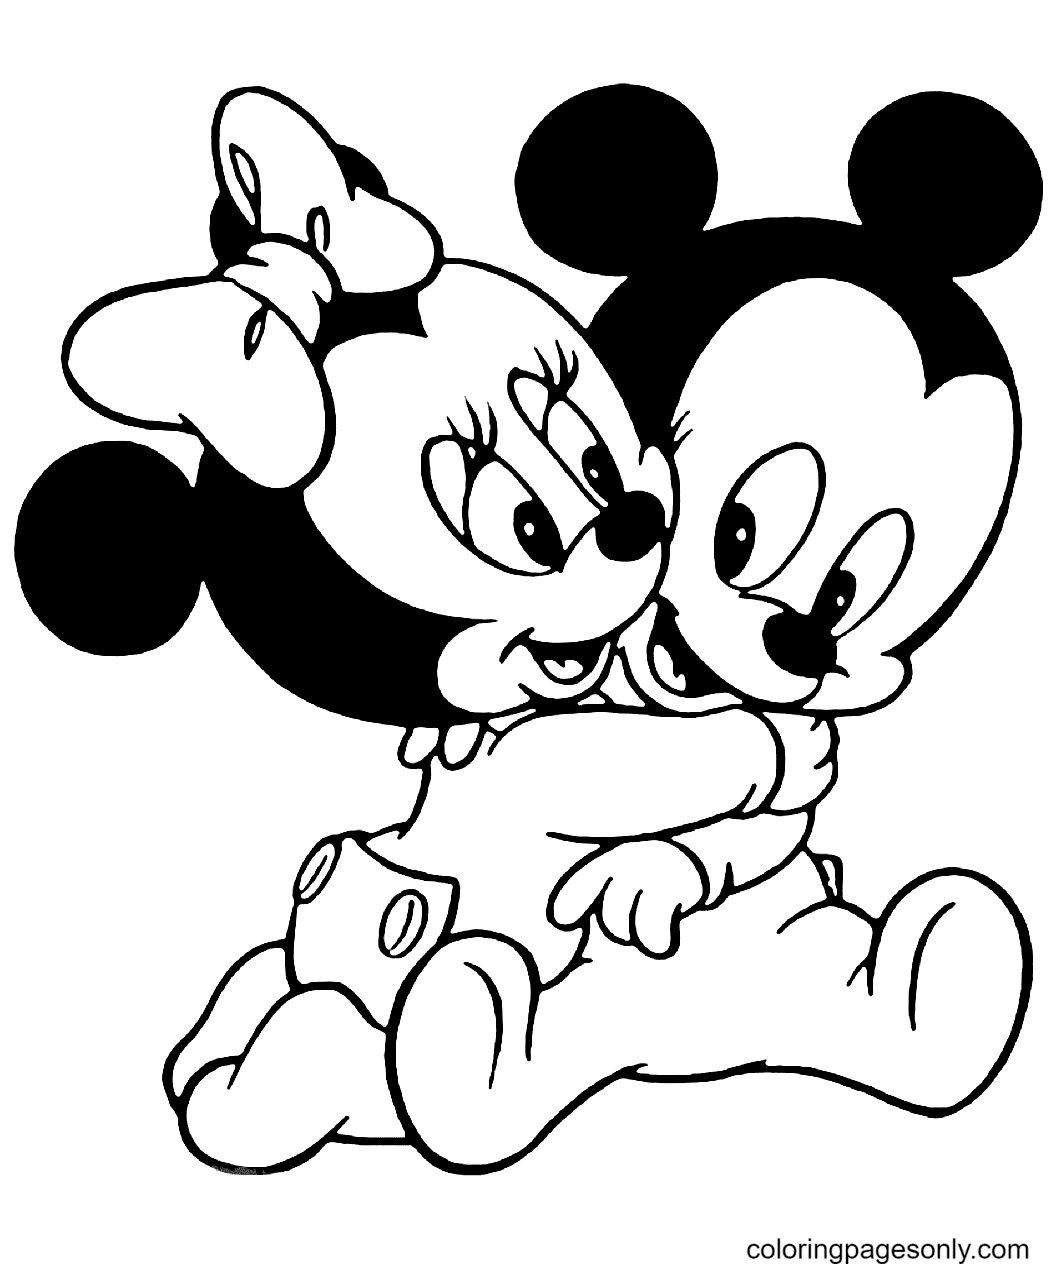 coloring-pages-of-mickey-and-minnie-mouse-find-the-best-mickey-mouse-coloring-pages-for-kids